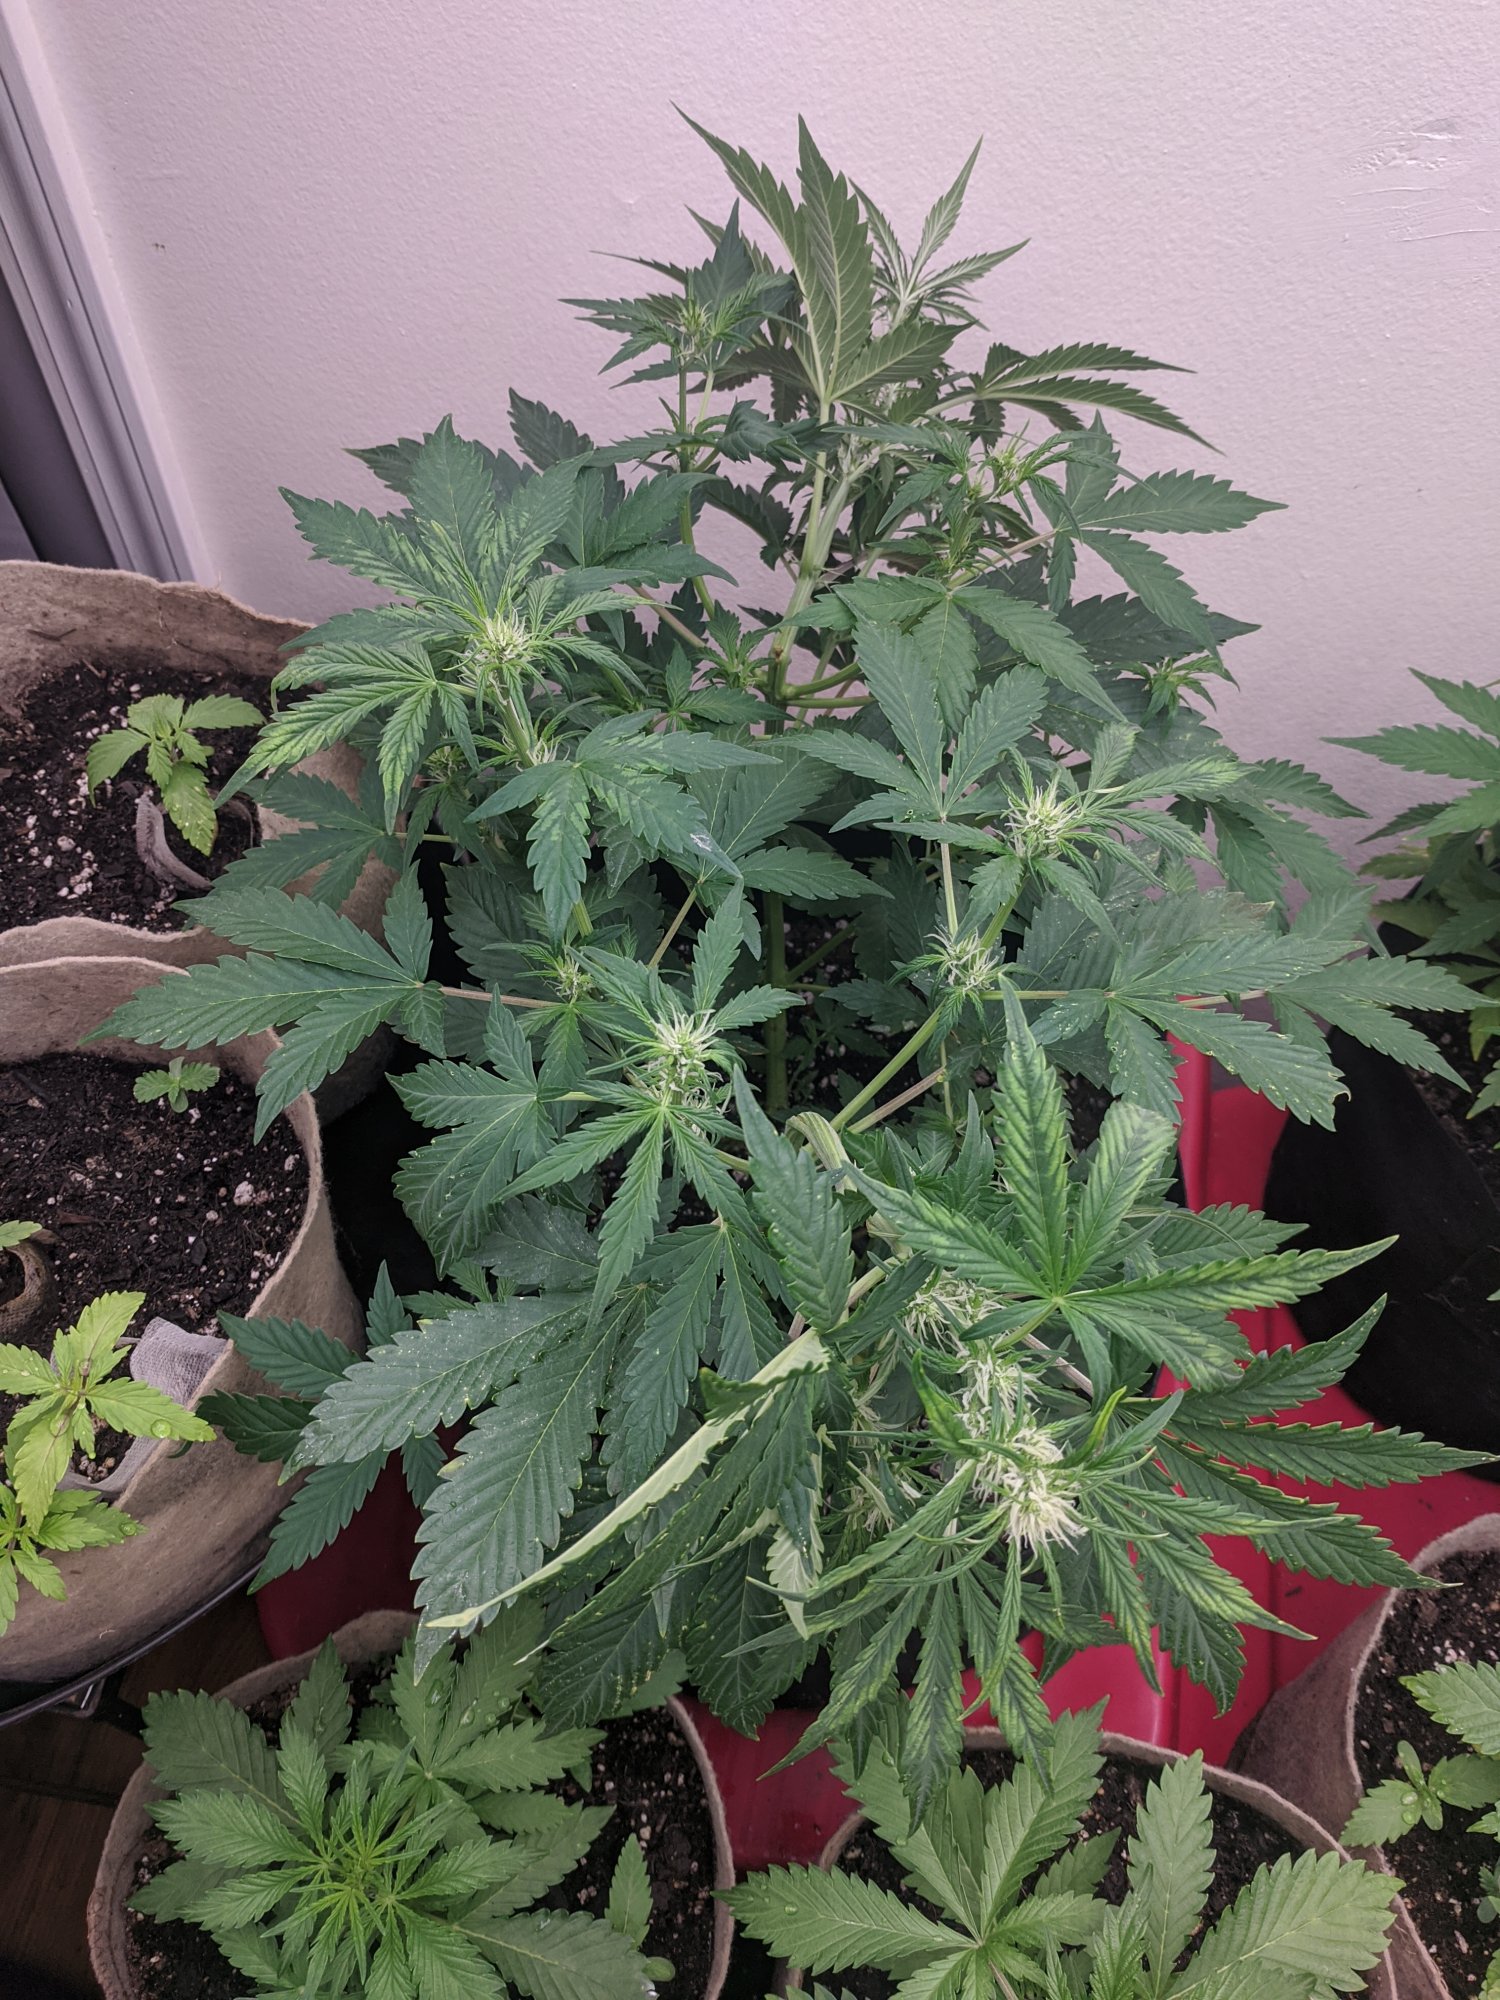 Franksters perpetual grow there will be more post 4